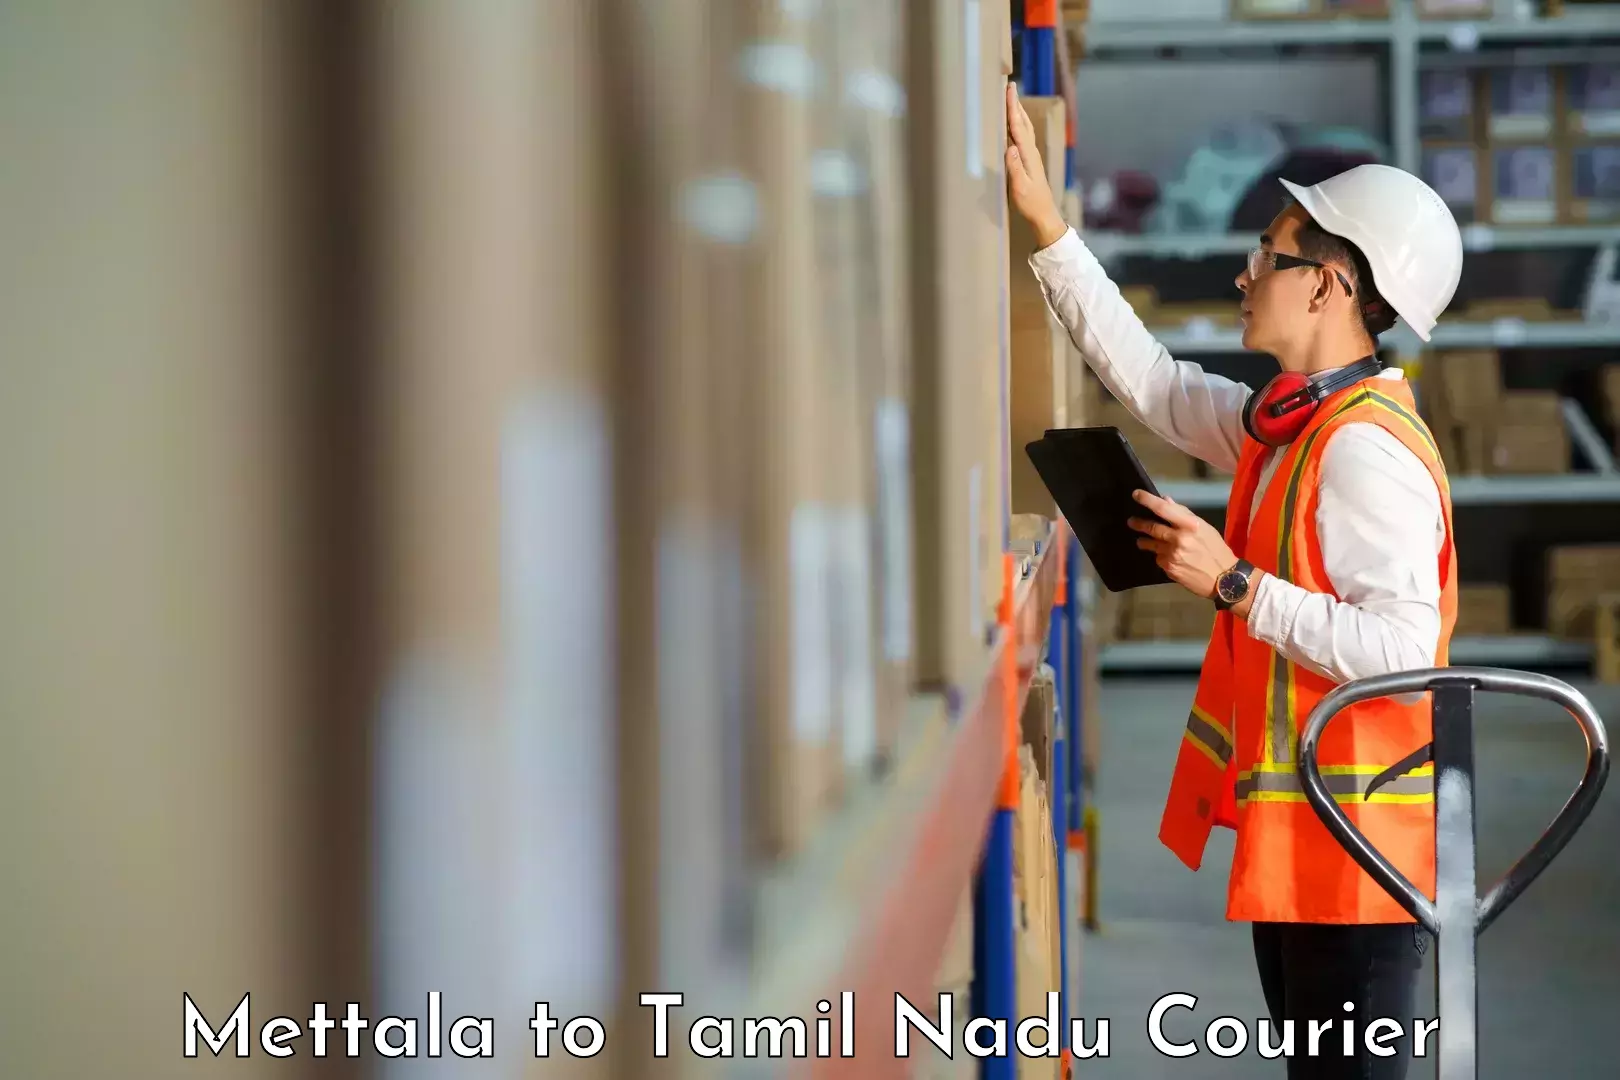 Global shipping networks in Mettala to Katpadi